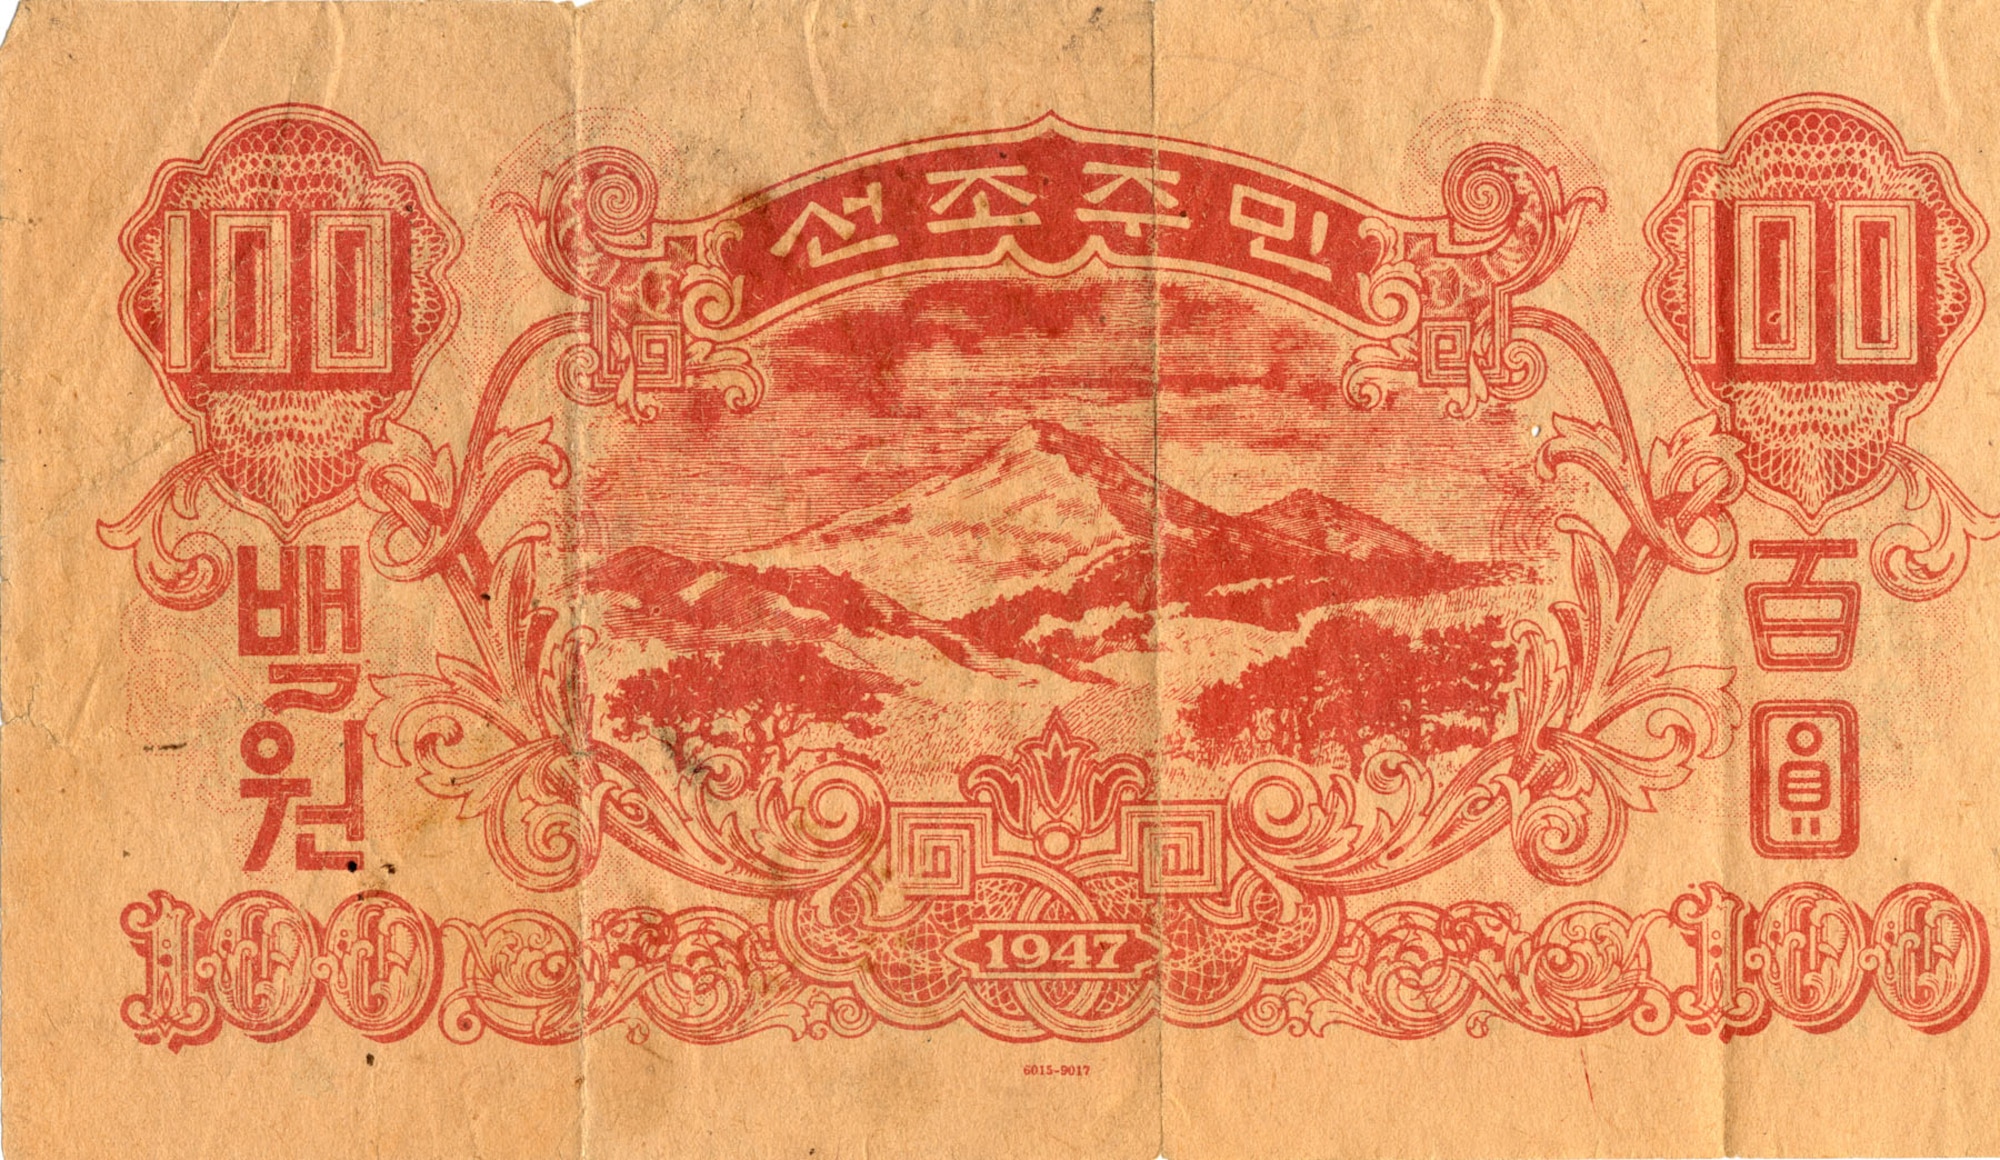 Air Force aircraft dropped certificates that promised enemy soldiers safe passage through UN lines if they surrendered. One side of this pass (shown here) looked like a North Korean 100 Won bill, which would entice an enemy soldier to pick it up. The other side had instructions written in Korean, English and Chinese. (U.S. Air Force photo)